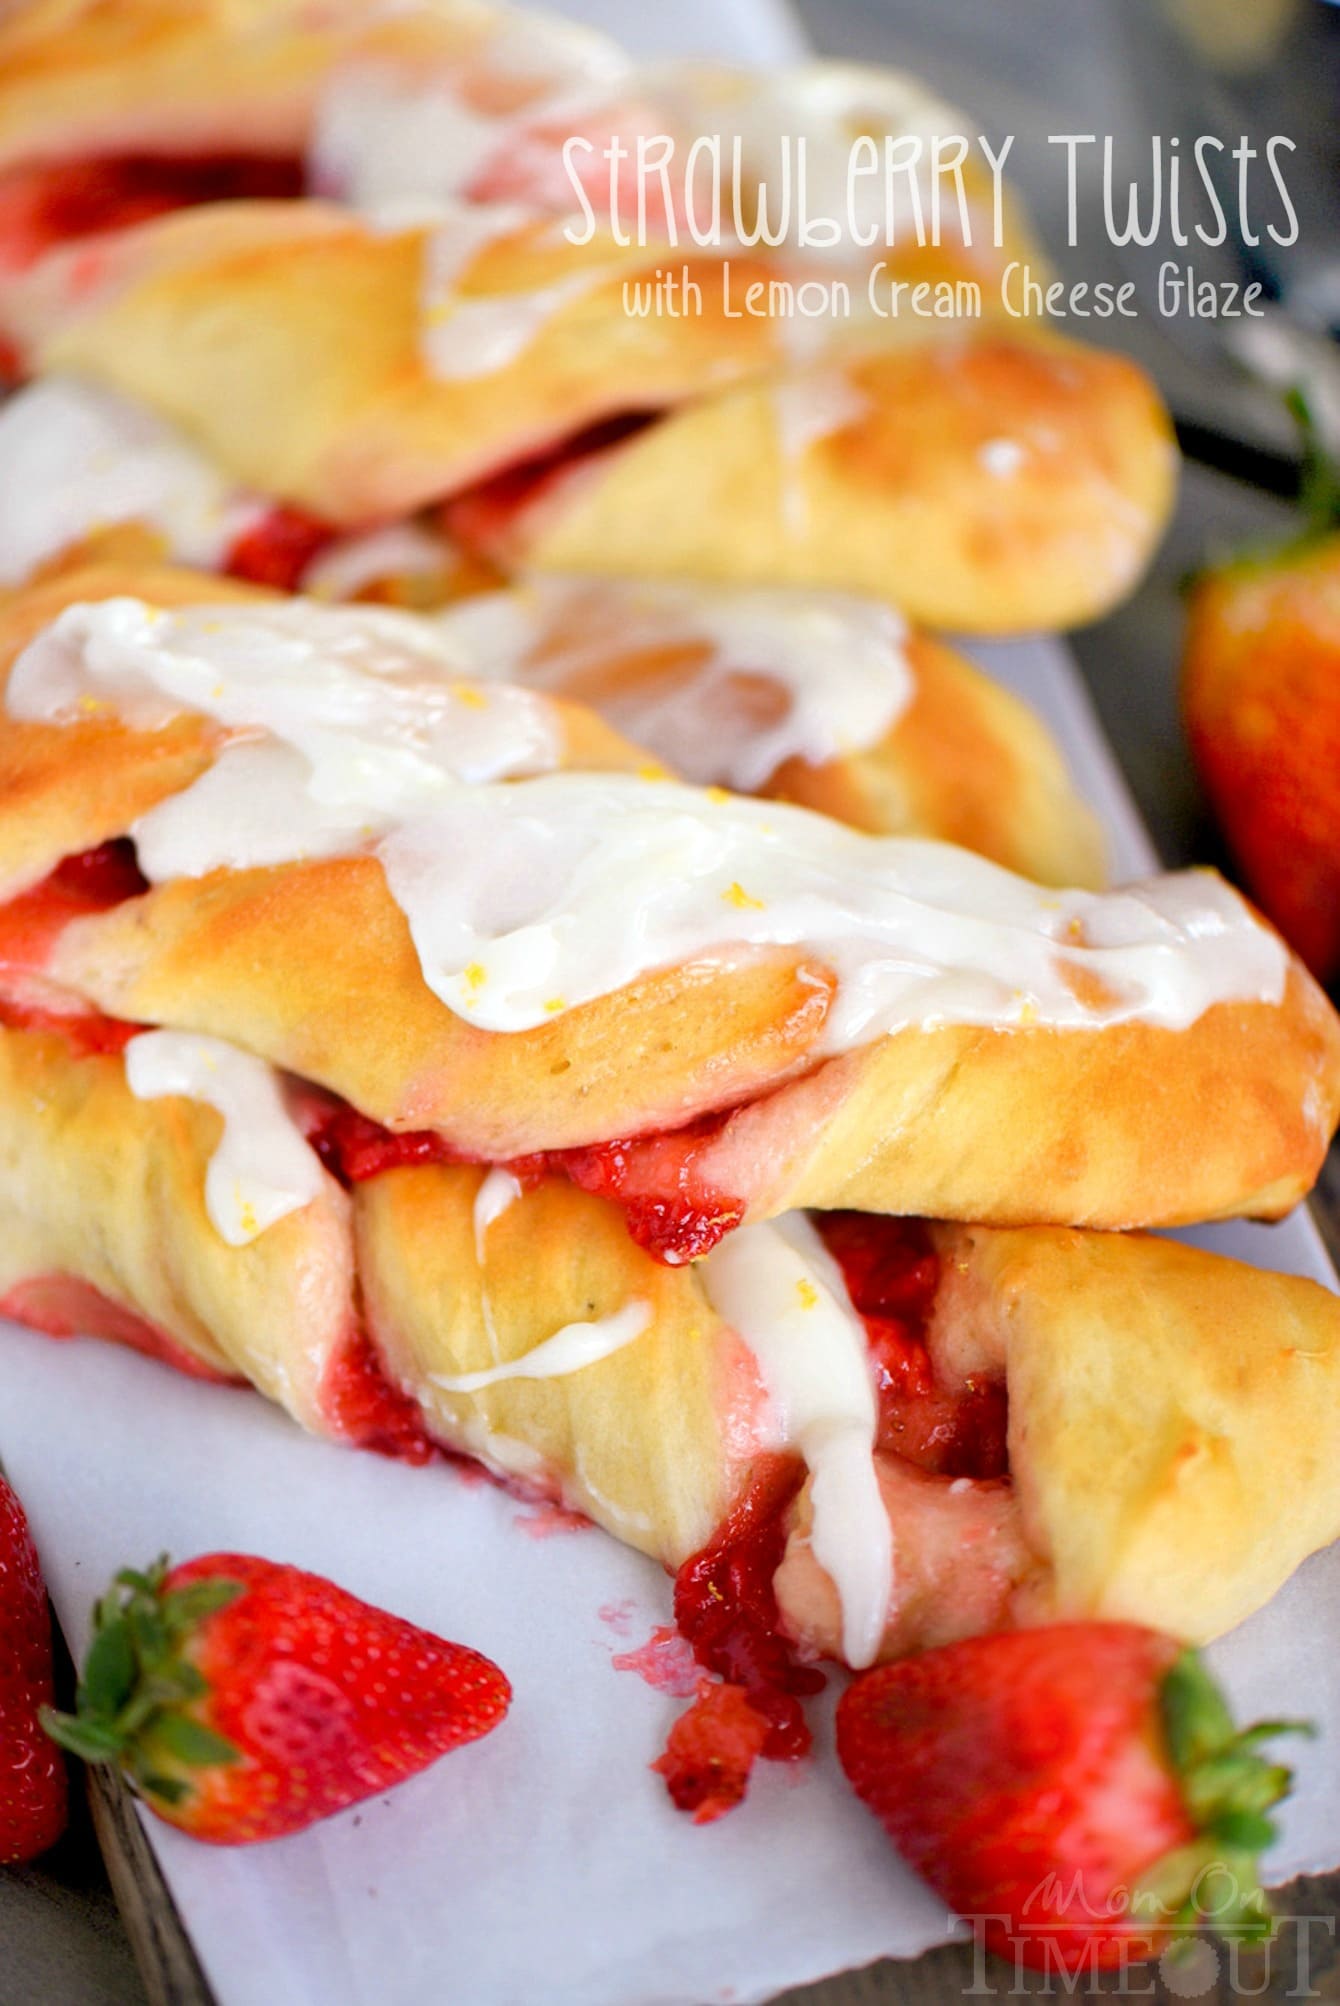 Strawberry Twists with Lemon Cream Cheese Glaze are sure to become your new favorite addition to Sunday brunch! A homemade strawberry filling makes these twists extra special and delicious and the lemon cream cheese glaze is going to knock your socks off! | Mom On Timeout